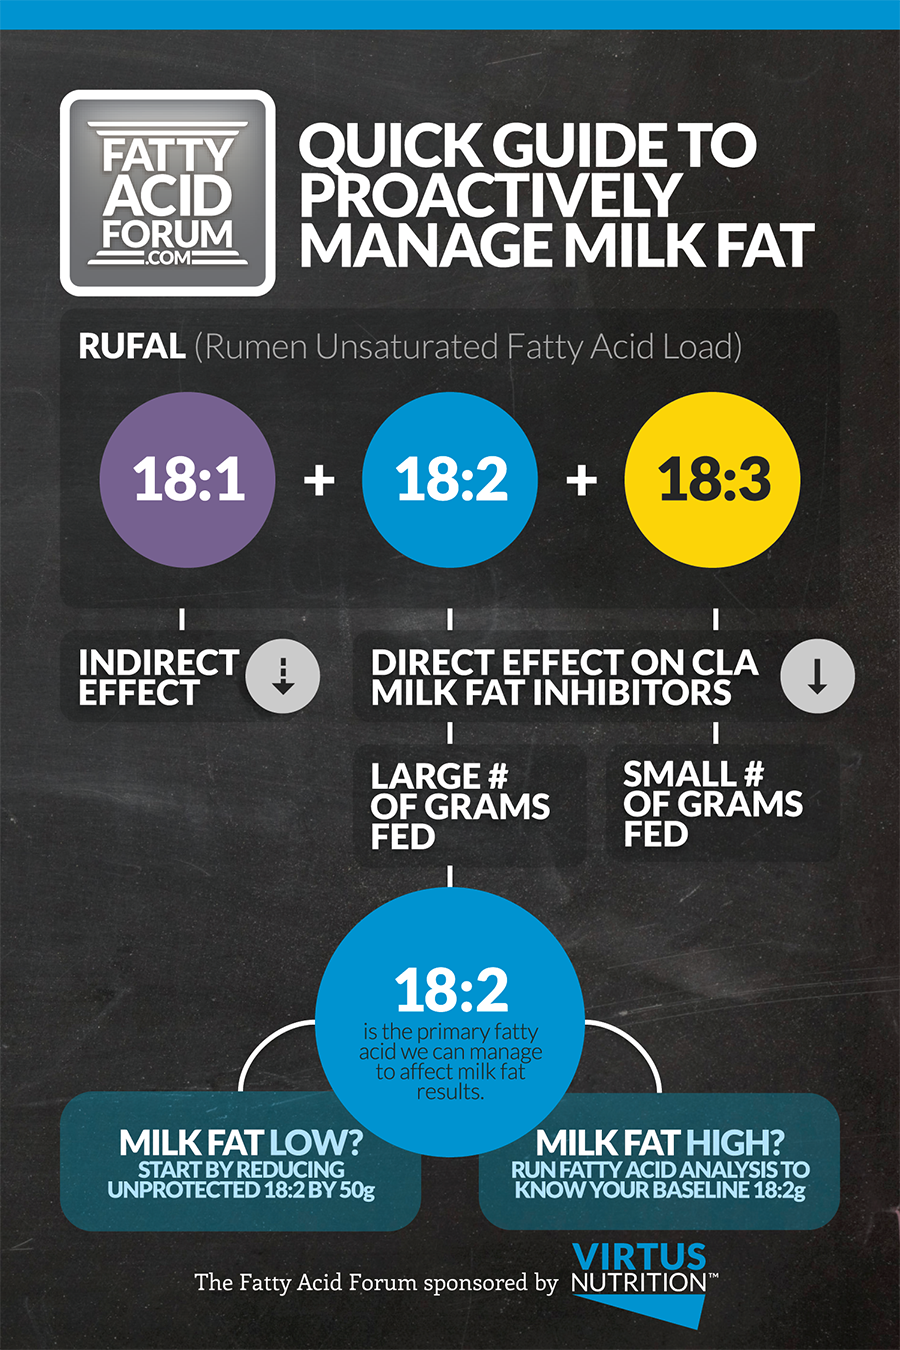 Quick Guide to Proactively Managing Milk Fat